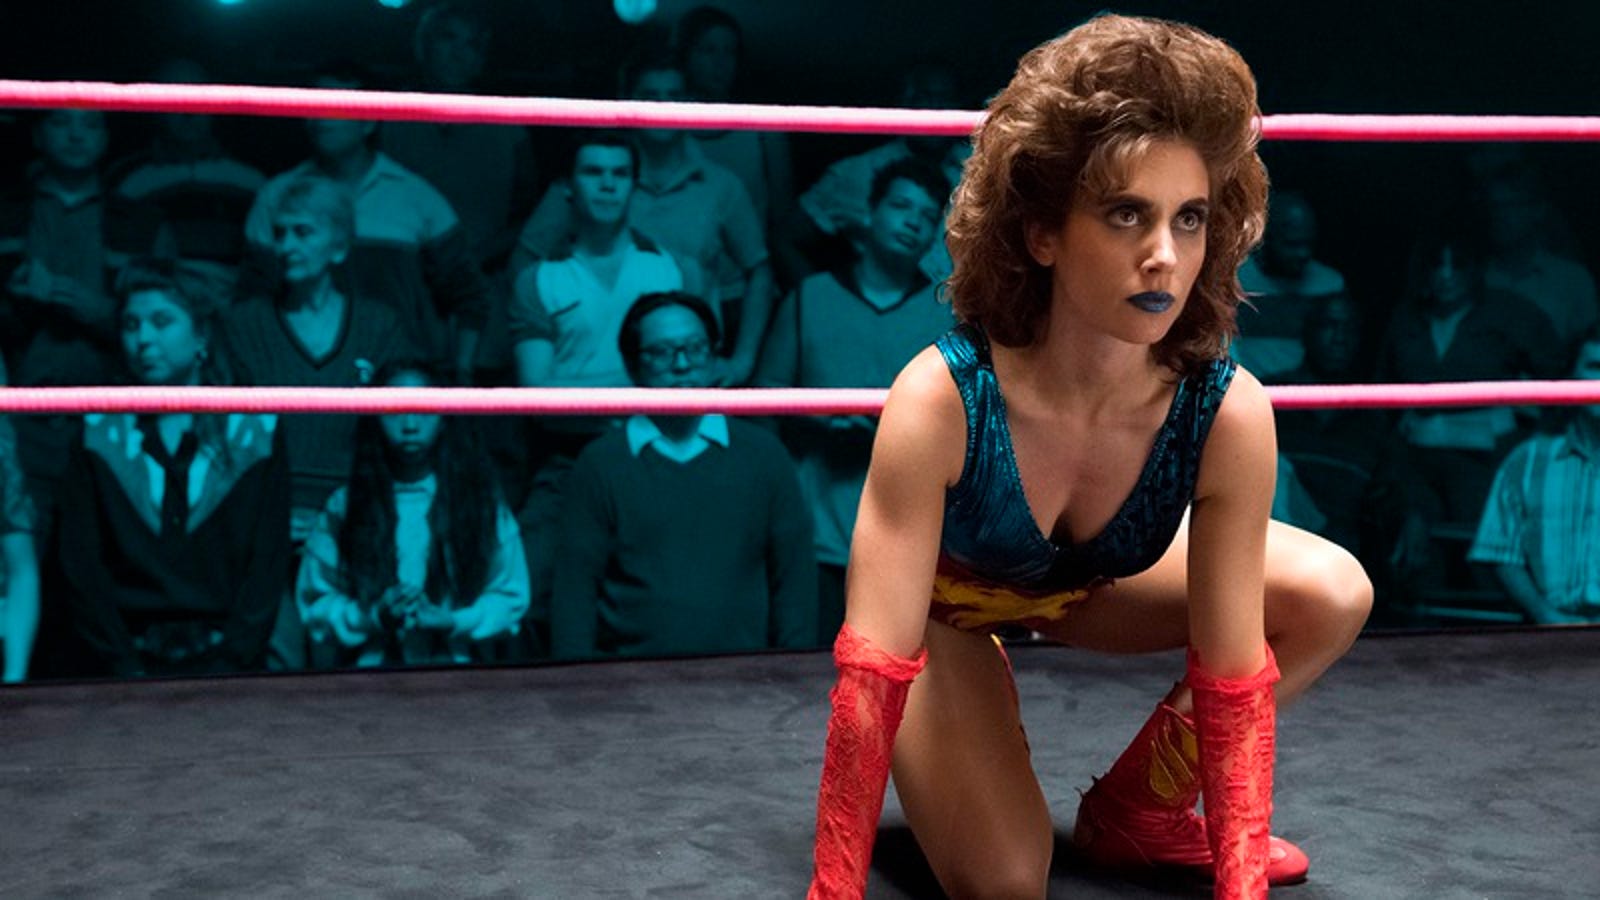 Alison Brie On Her “sexless” Glow Character And Getting Thrown Around A